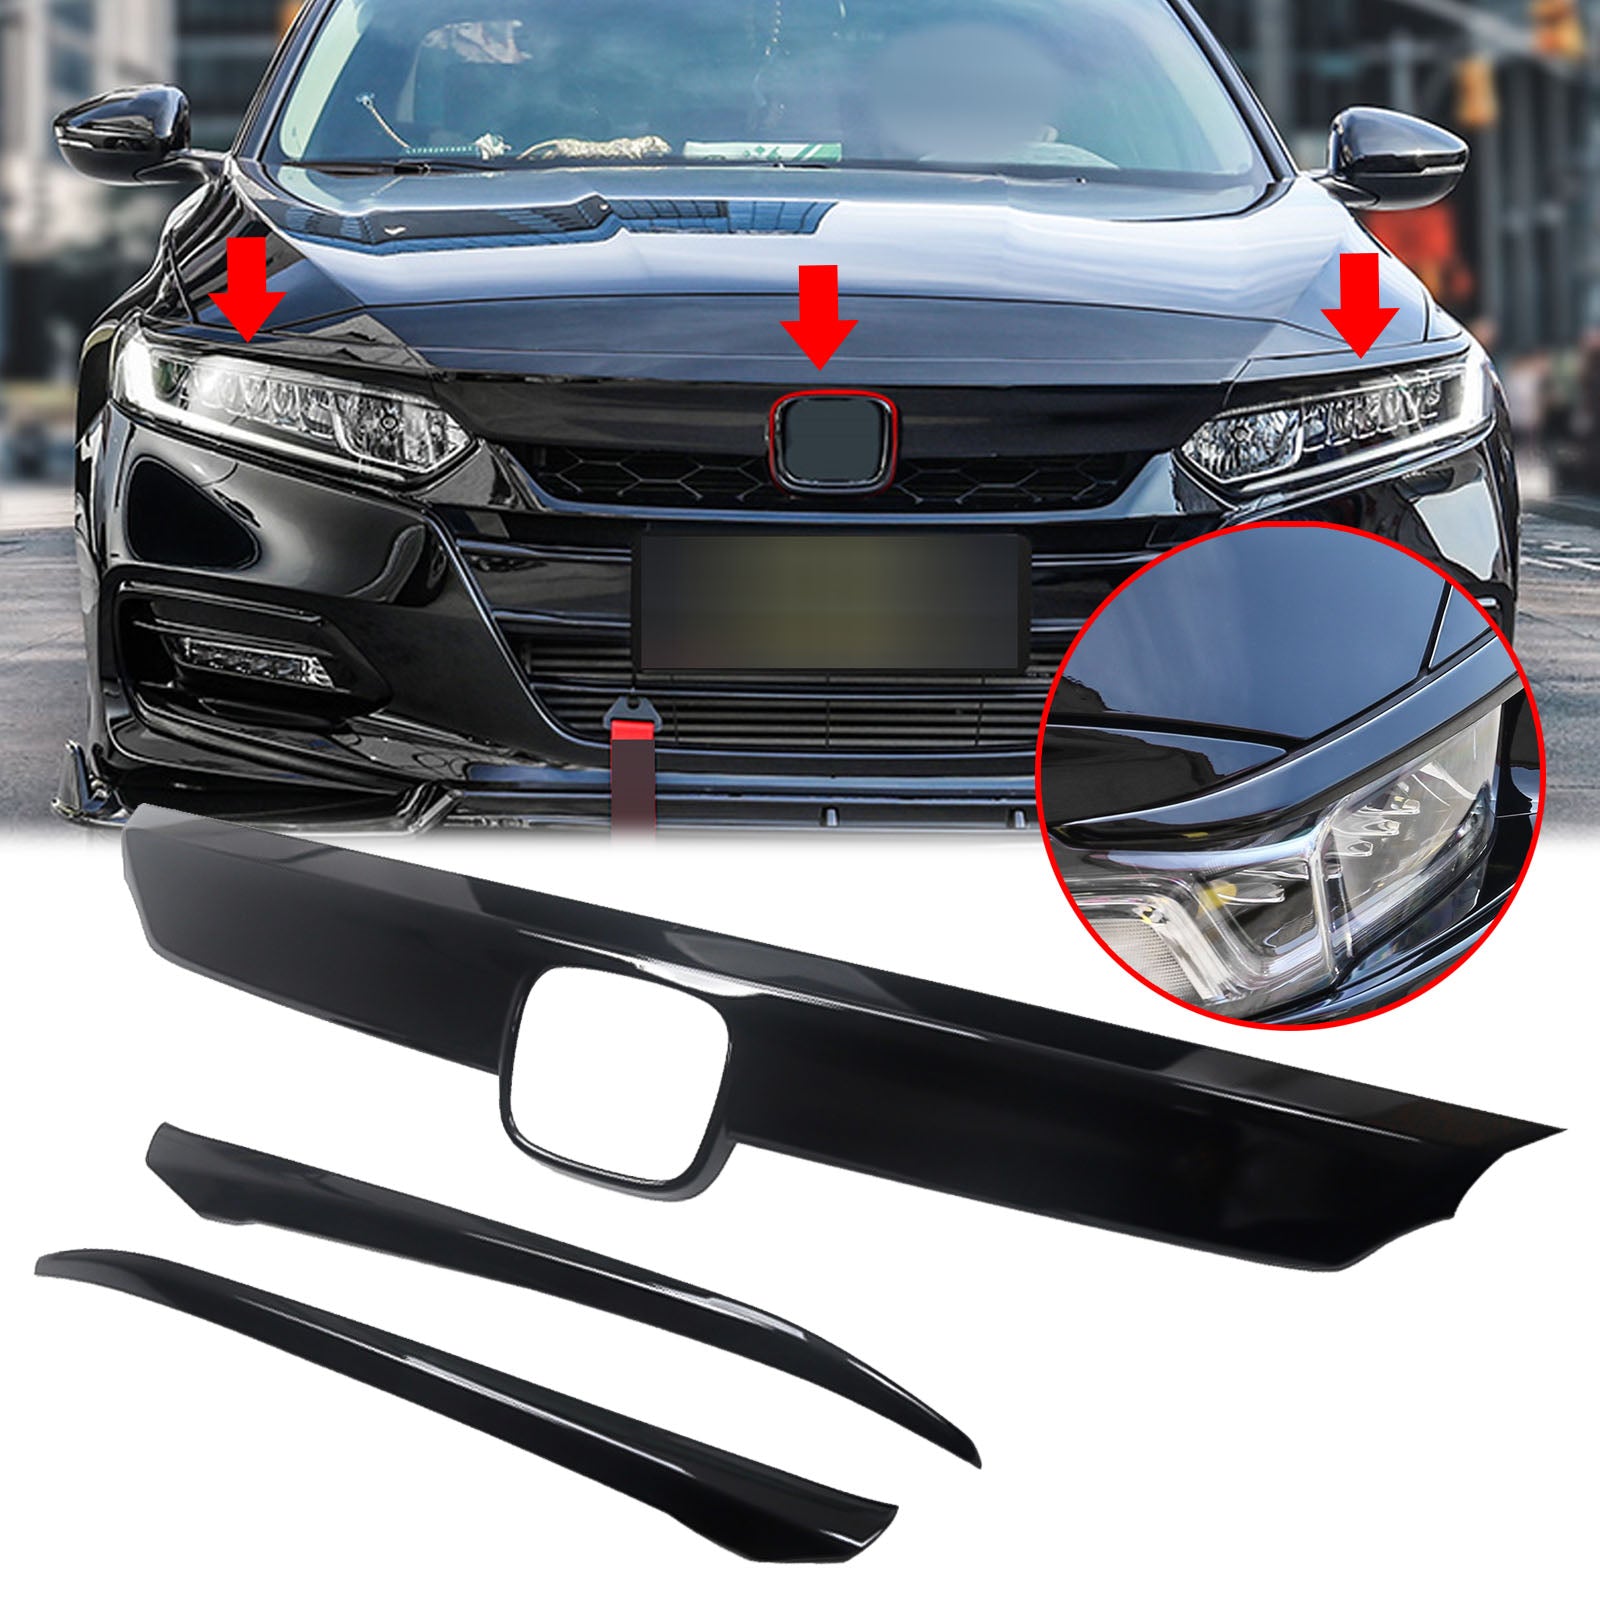 Front Grille Moulding Trim fit for compatible with Honda Accord | Xotic